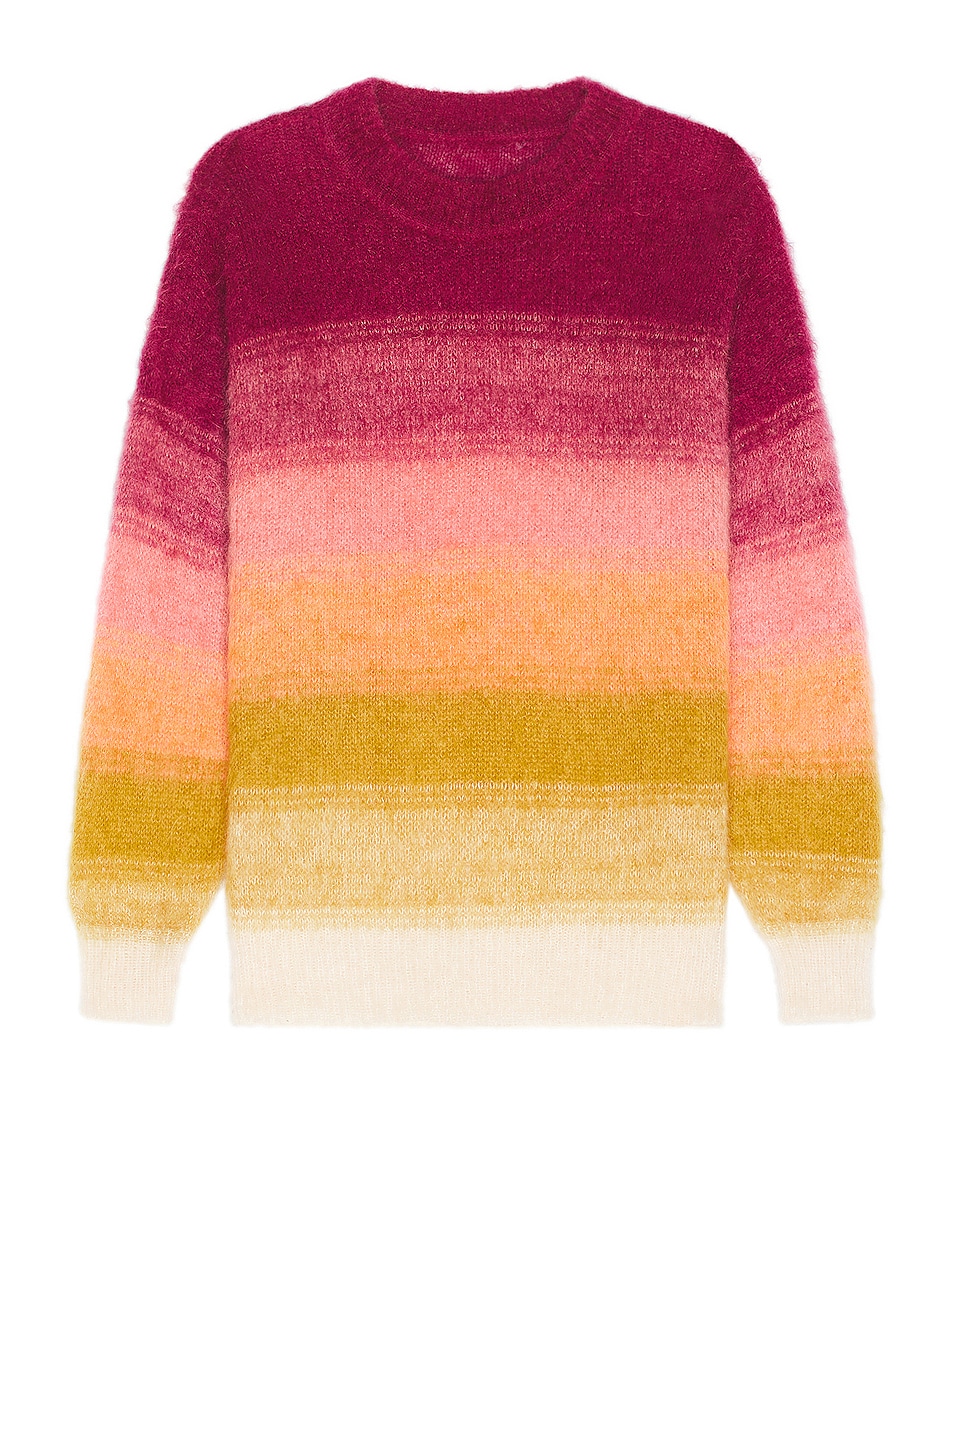 Image 1 of Isabel Marant Drussellh Gradient Brushed Sweater in Raspberry & Ocre